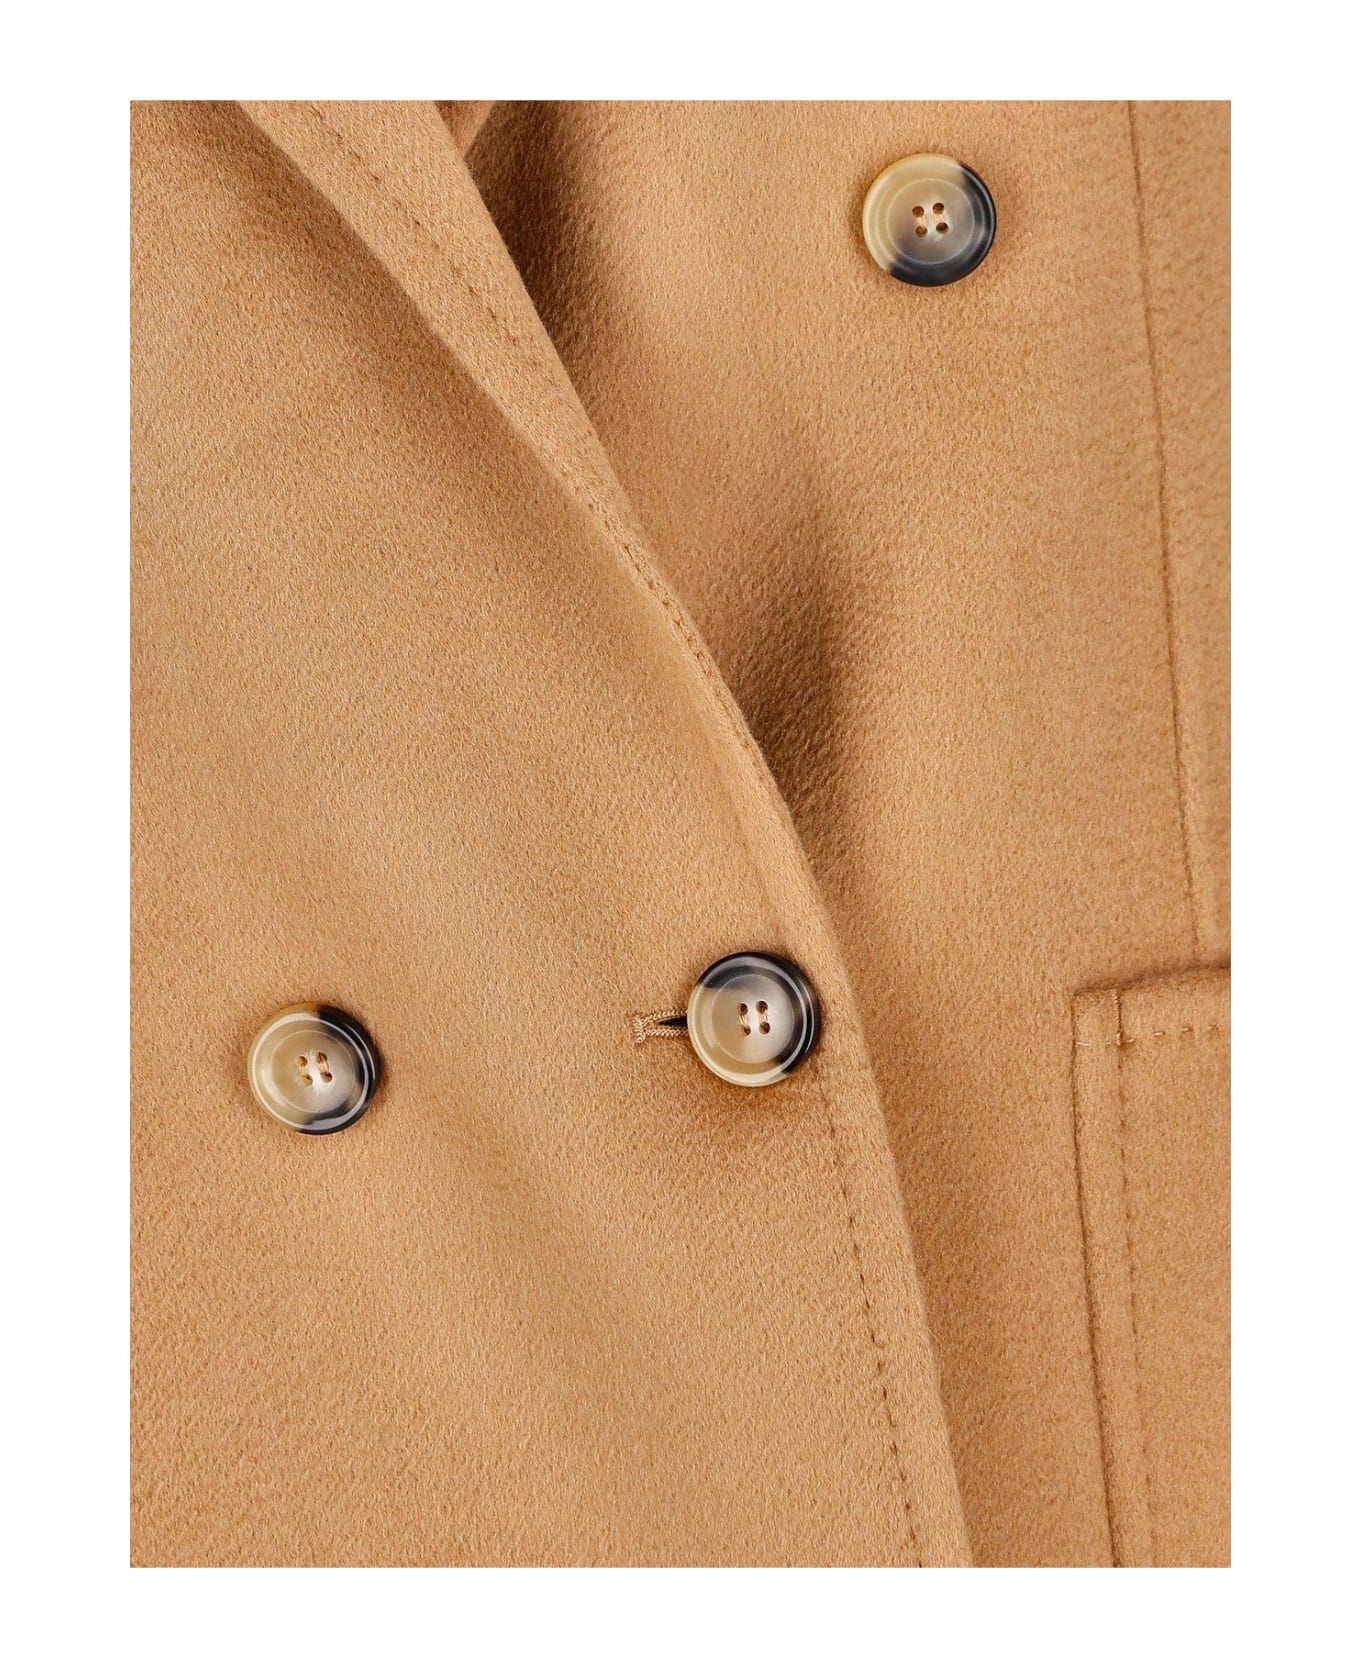 Max Mara Double-breasted Jacket In Wool And Cashmere - Camel